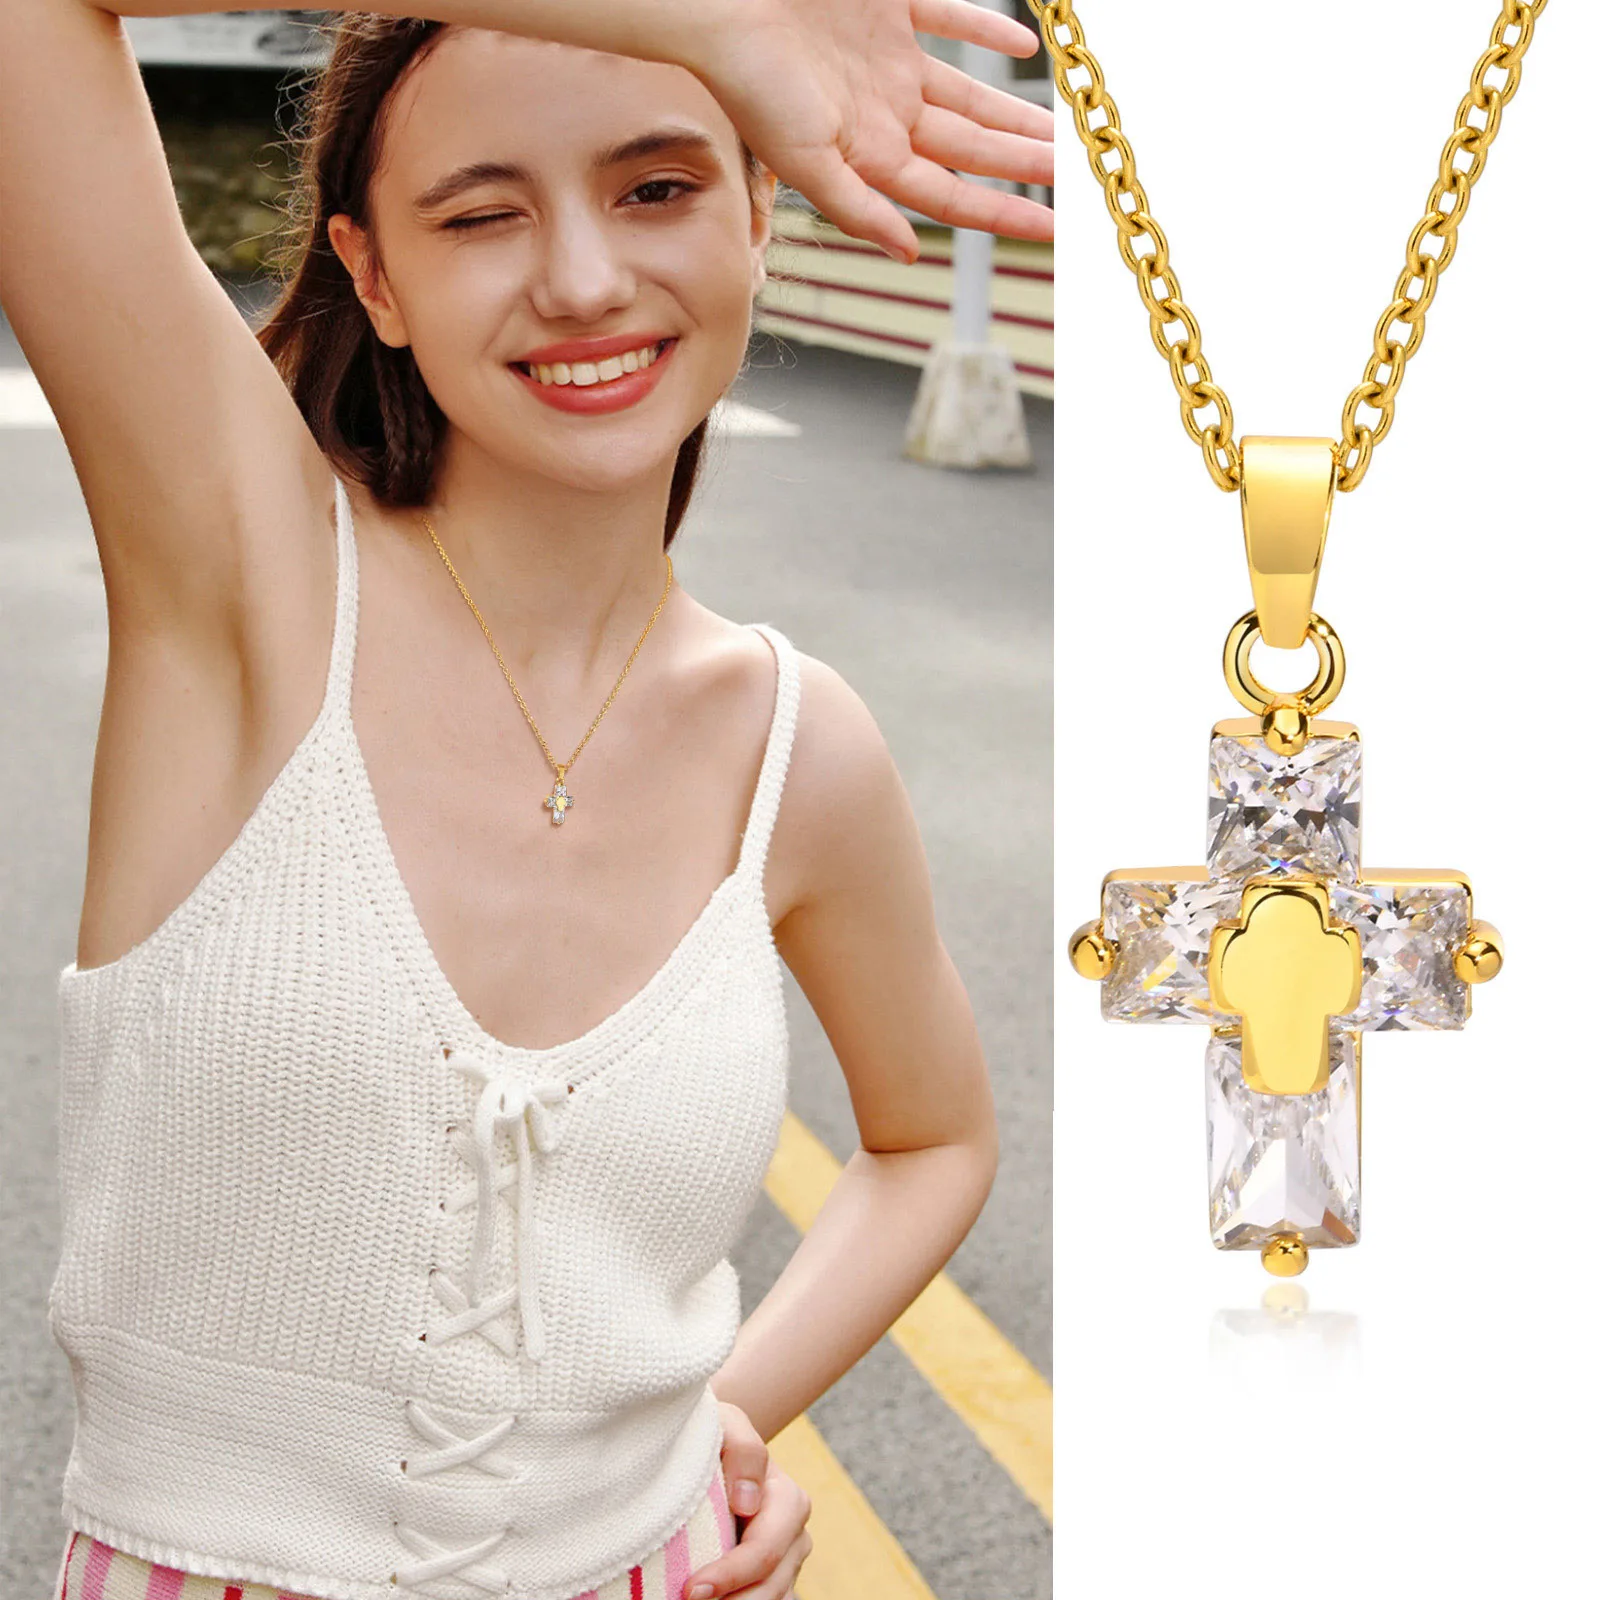 Double Dainty Cross Necklace – The Sis Kiss